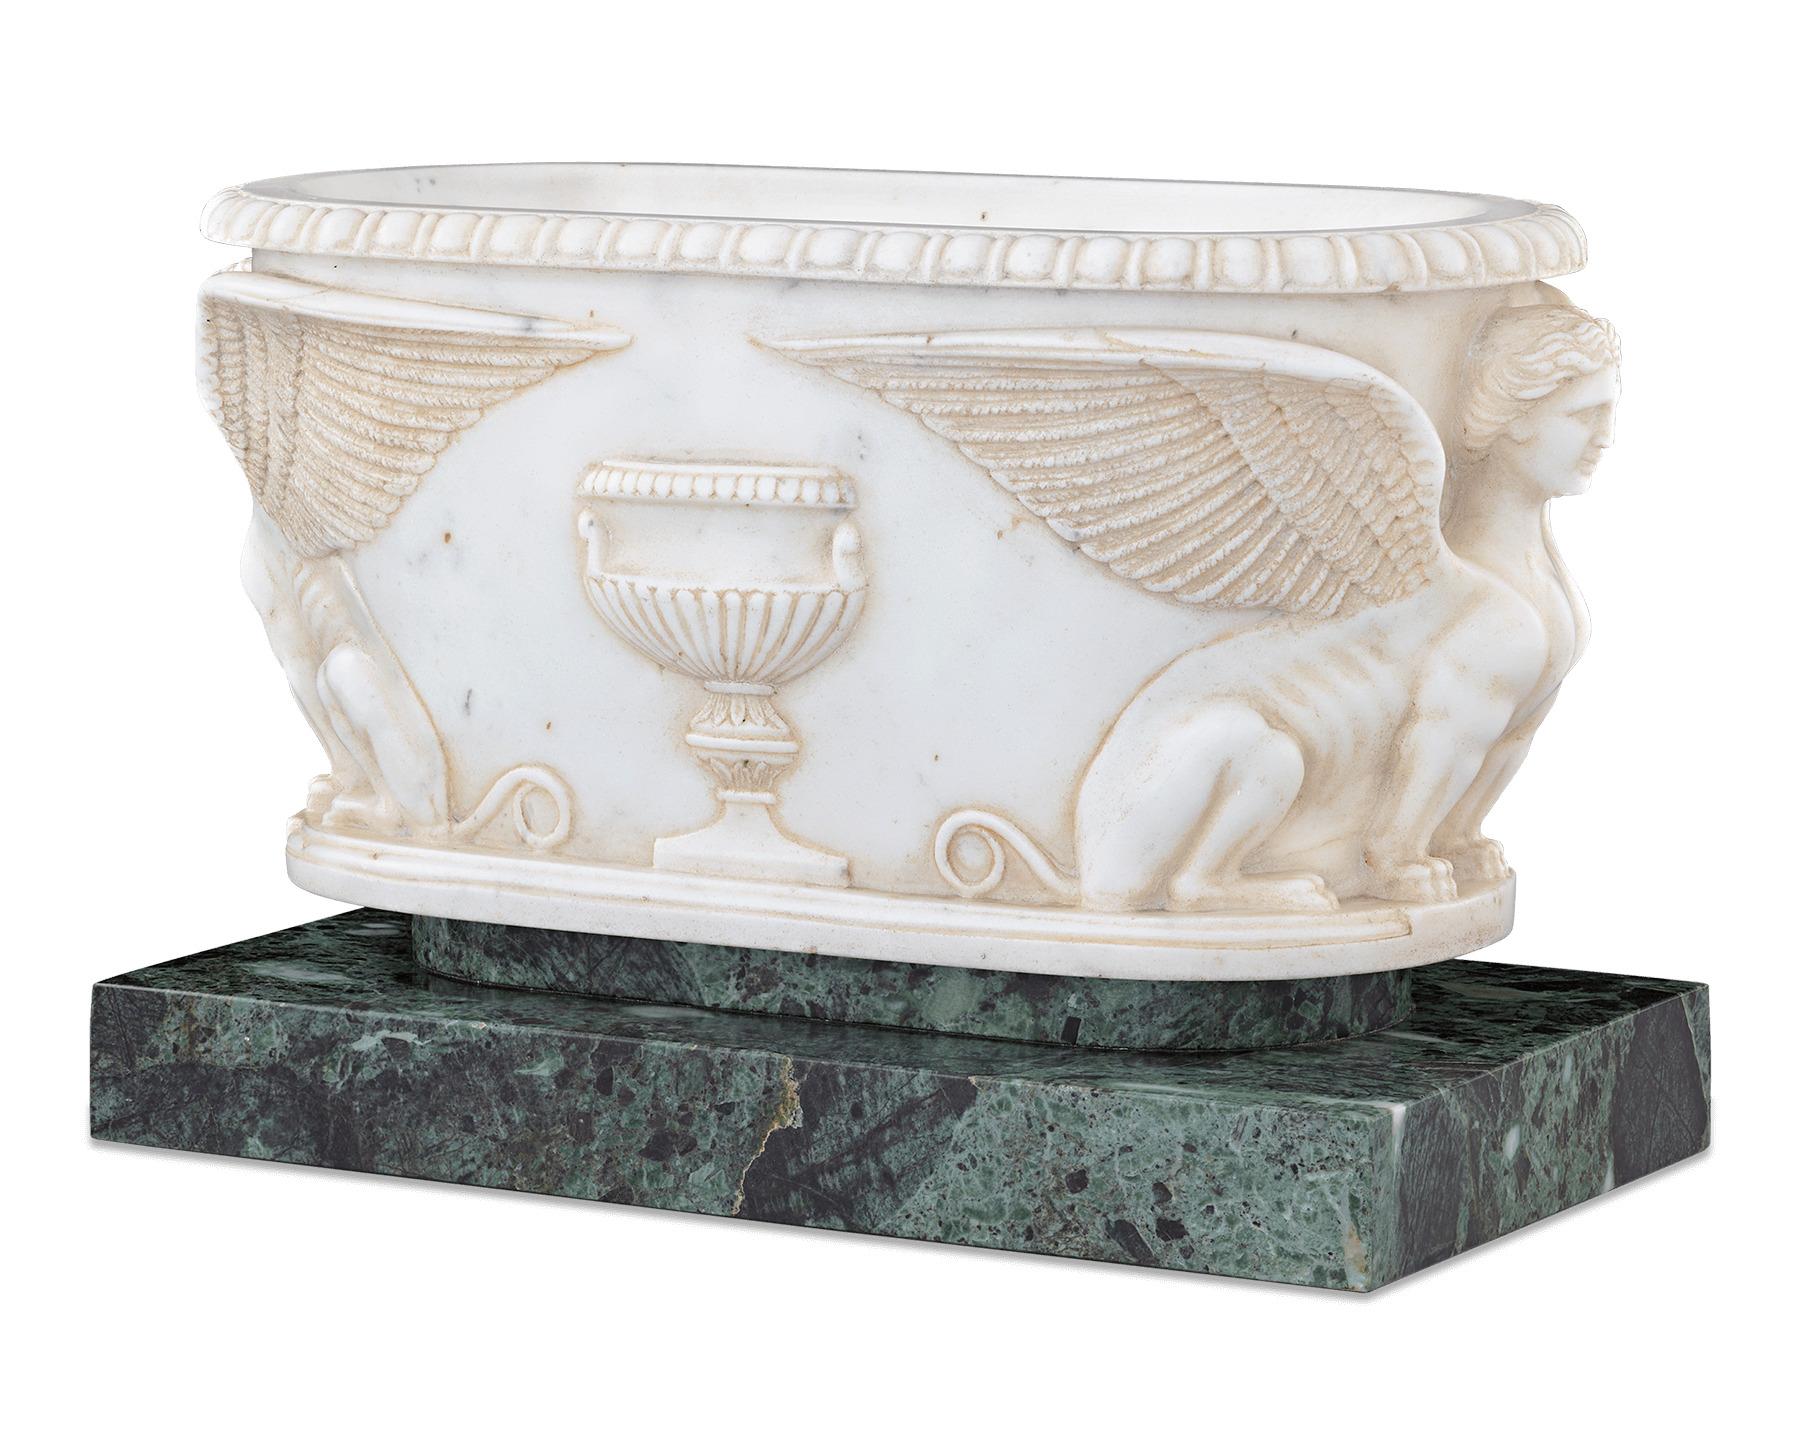 Almost certainly a memento of the aristocratic Grand Tour through Italy popular at the time of its creation, this rare and highly important 18th century marble was crafted in the form of an ancient Roman sarcophagus. Masterfully carved, finished in